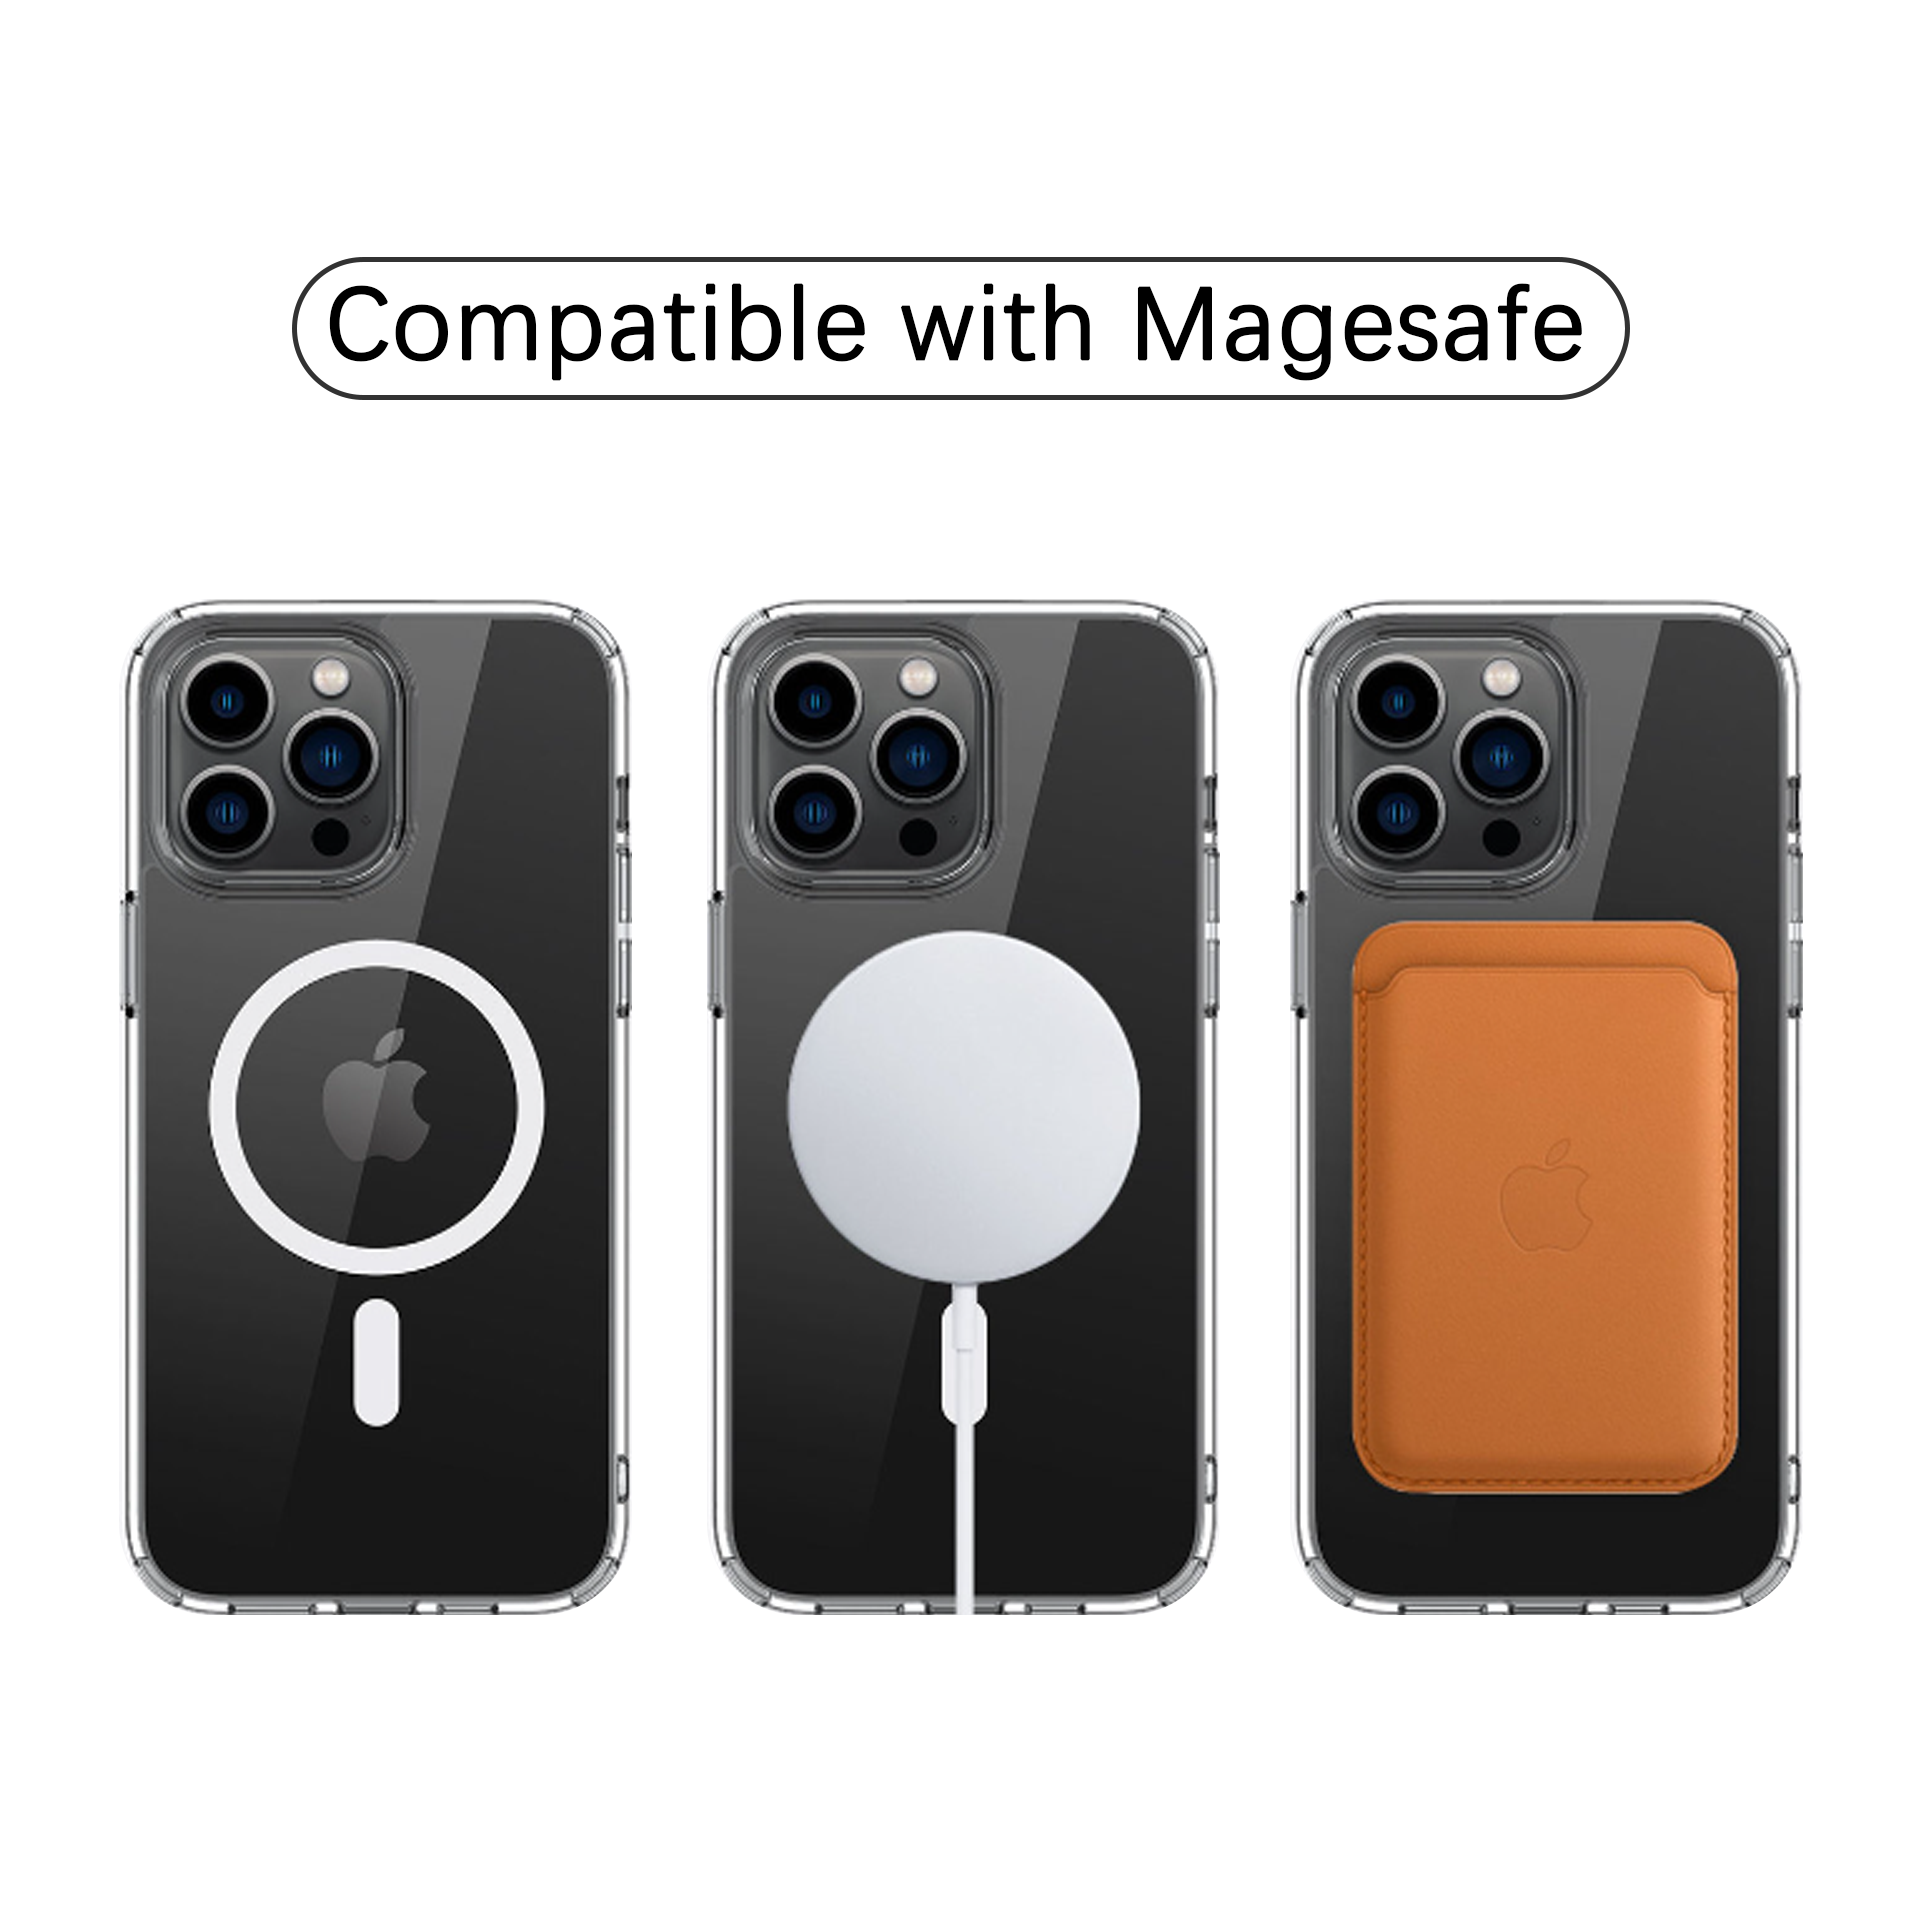 IZENIS IZ-0503 for iPhone 12/13/14 Series phone Case, Compatible with MagSafe, Shockproof Protection,  Anti Yellowing